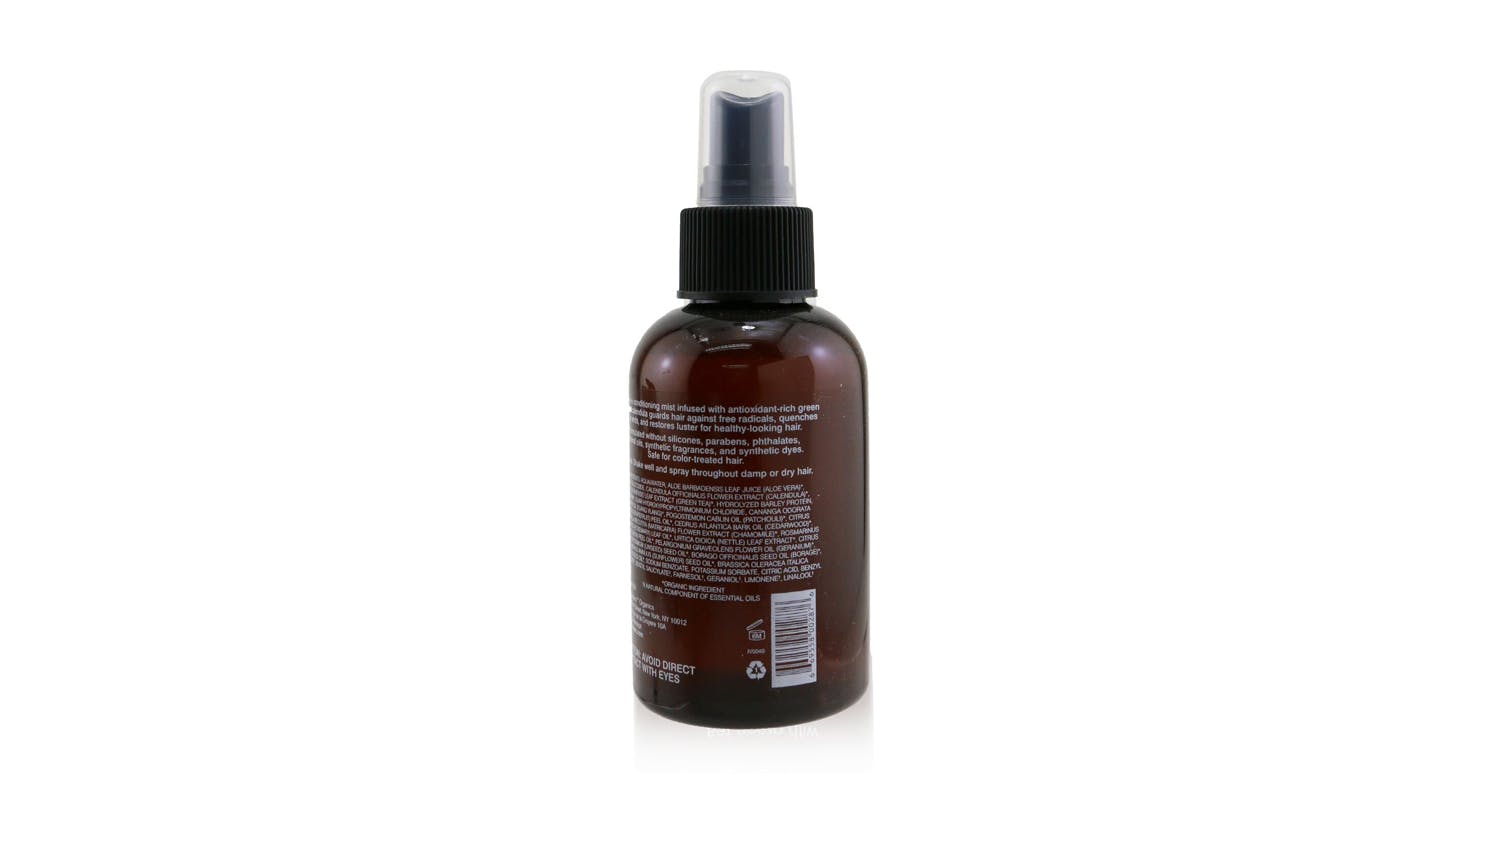 Leave-In Conditioning Mist with Green Tea and Calendula - 125ml/4.2oz